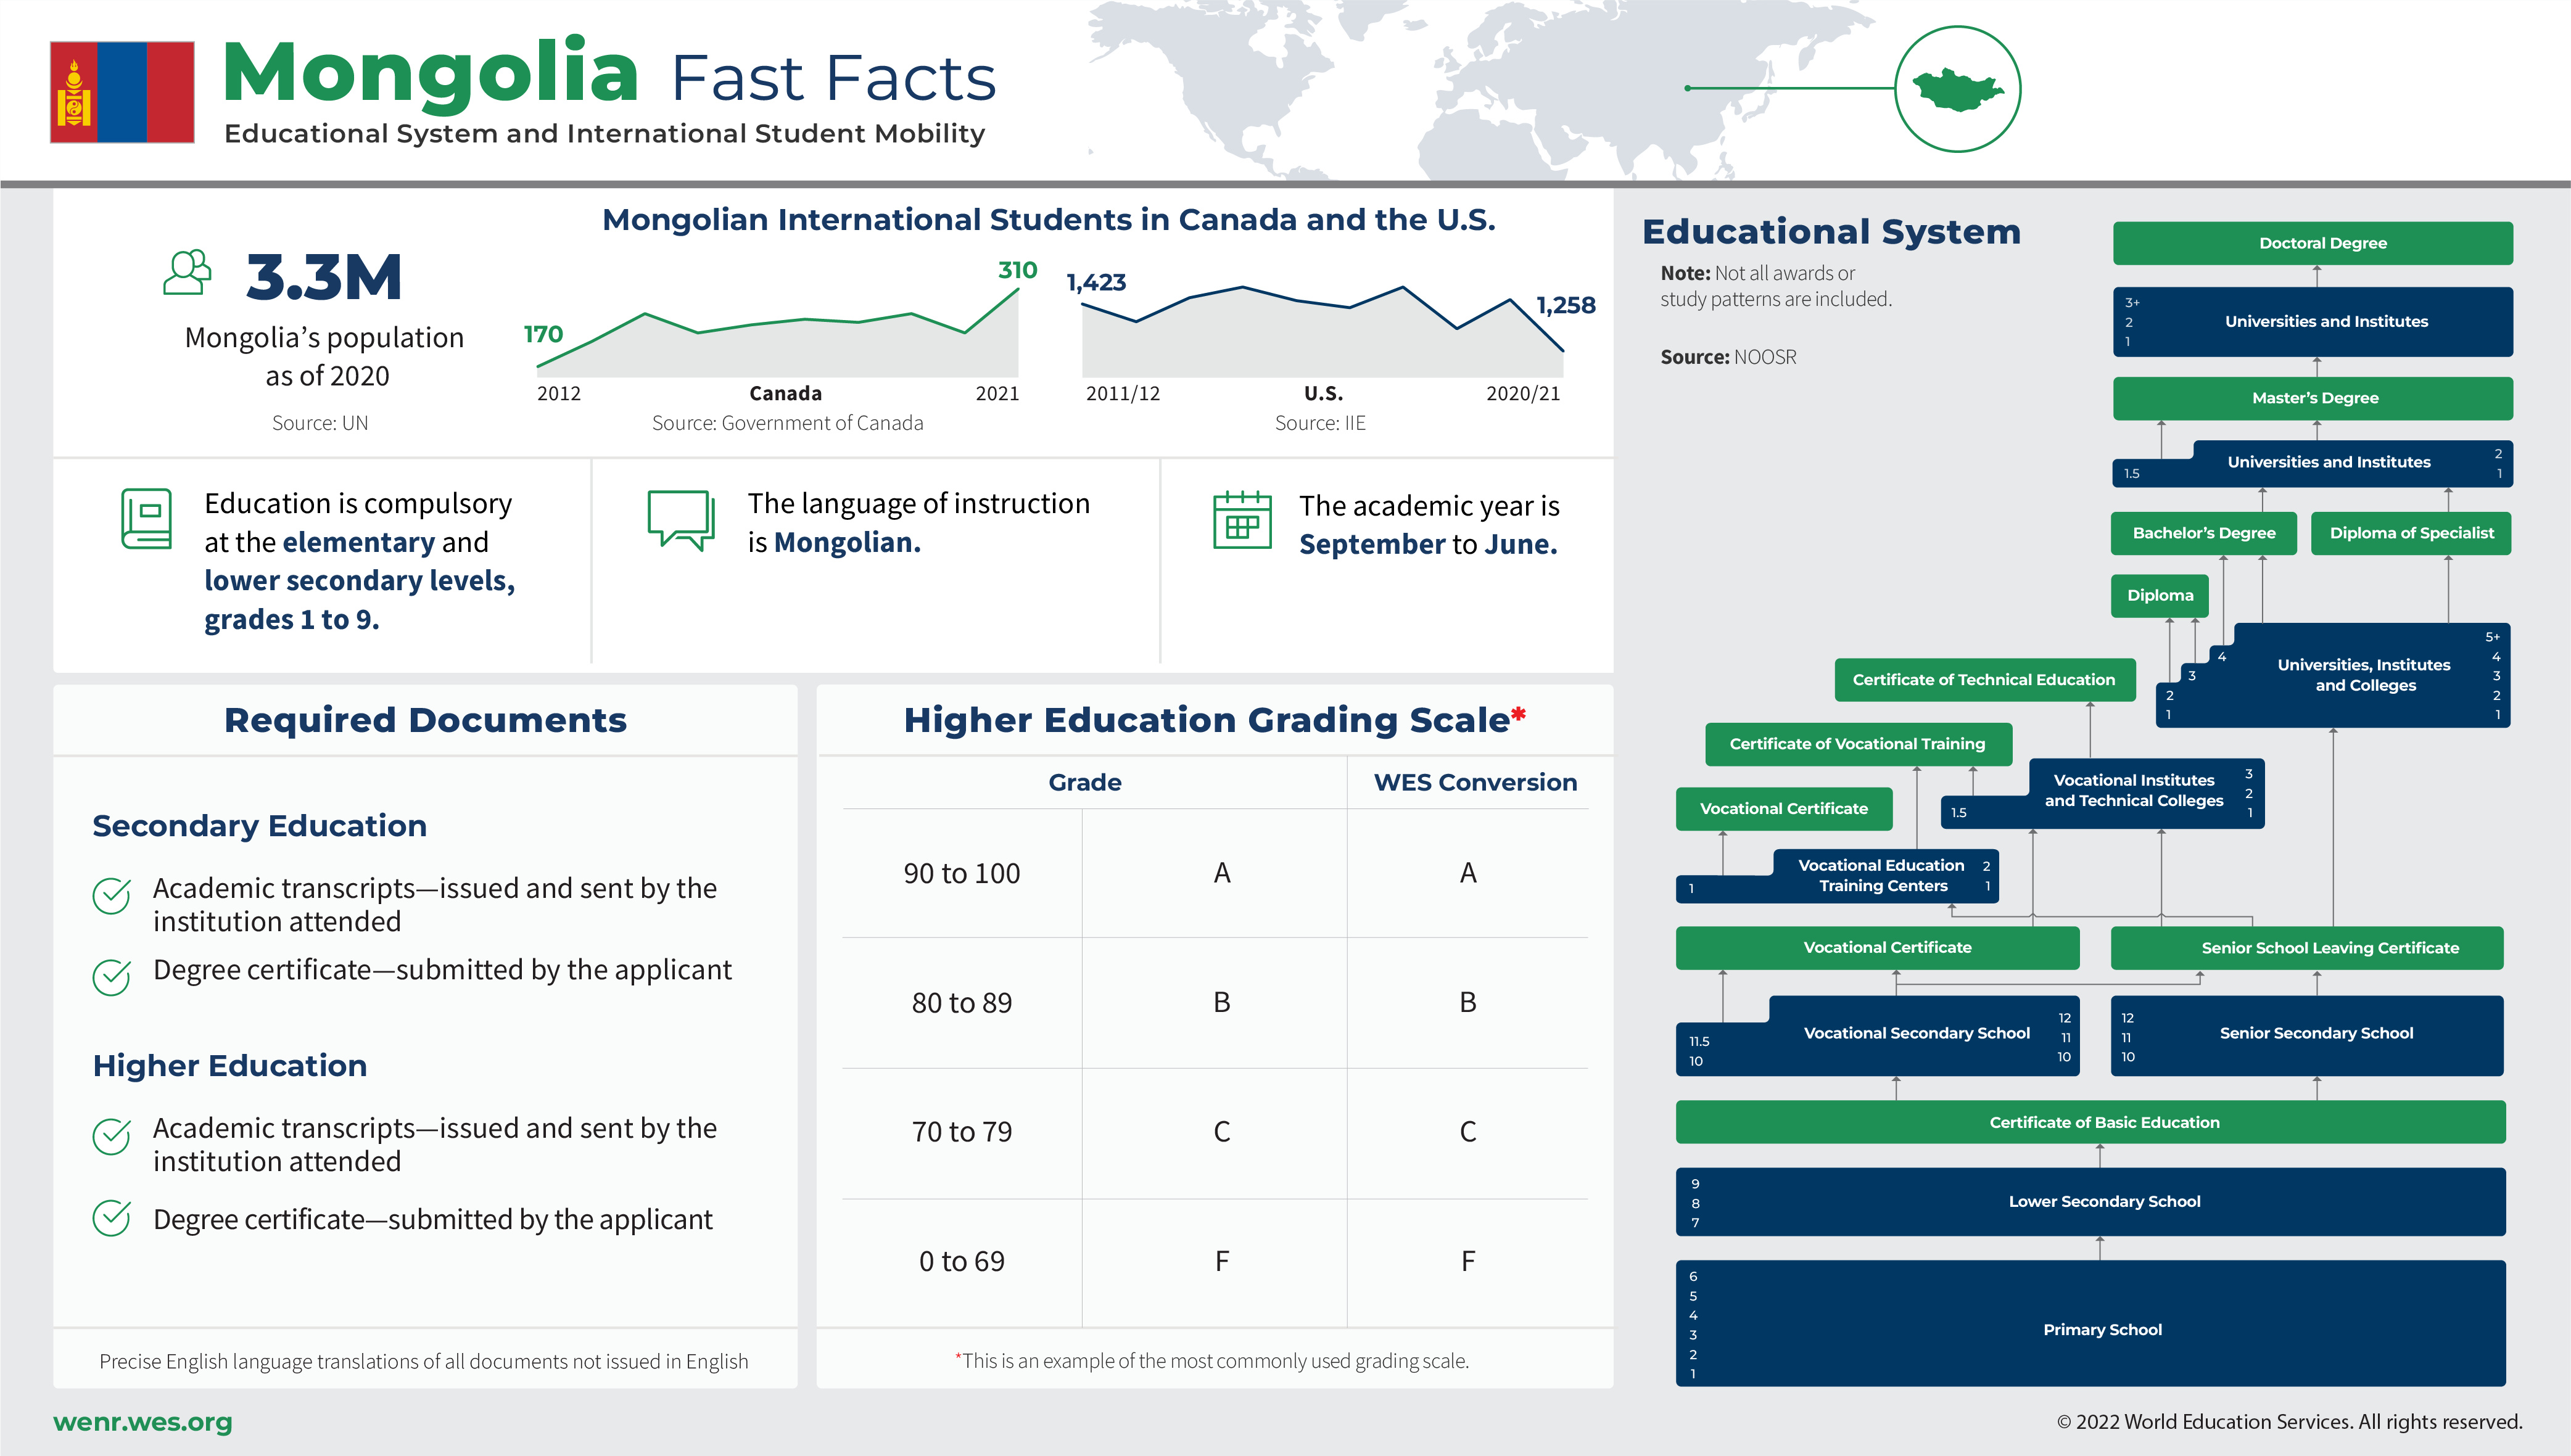 An infographic with fast facts on Mongolia's educational system and international student mobility